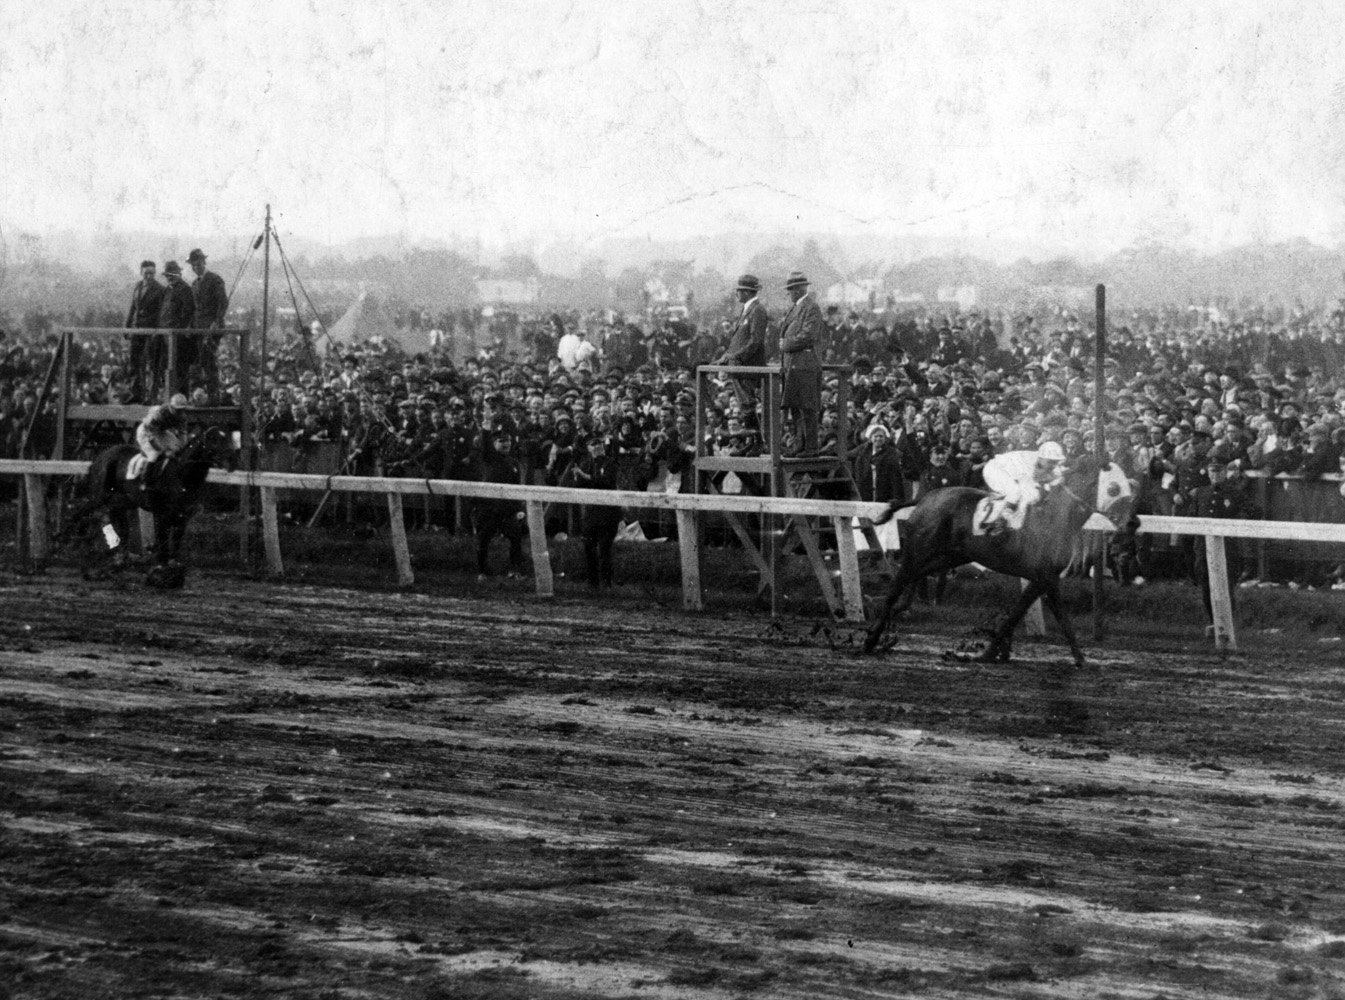 Zev (Earl Sande up) defeating Papyrus in their famous match race at Belmont Park, October 1923 (Museum Collection)